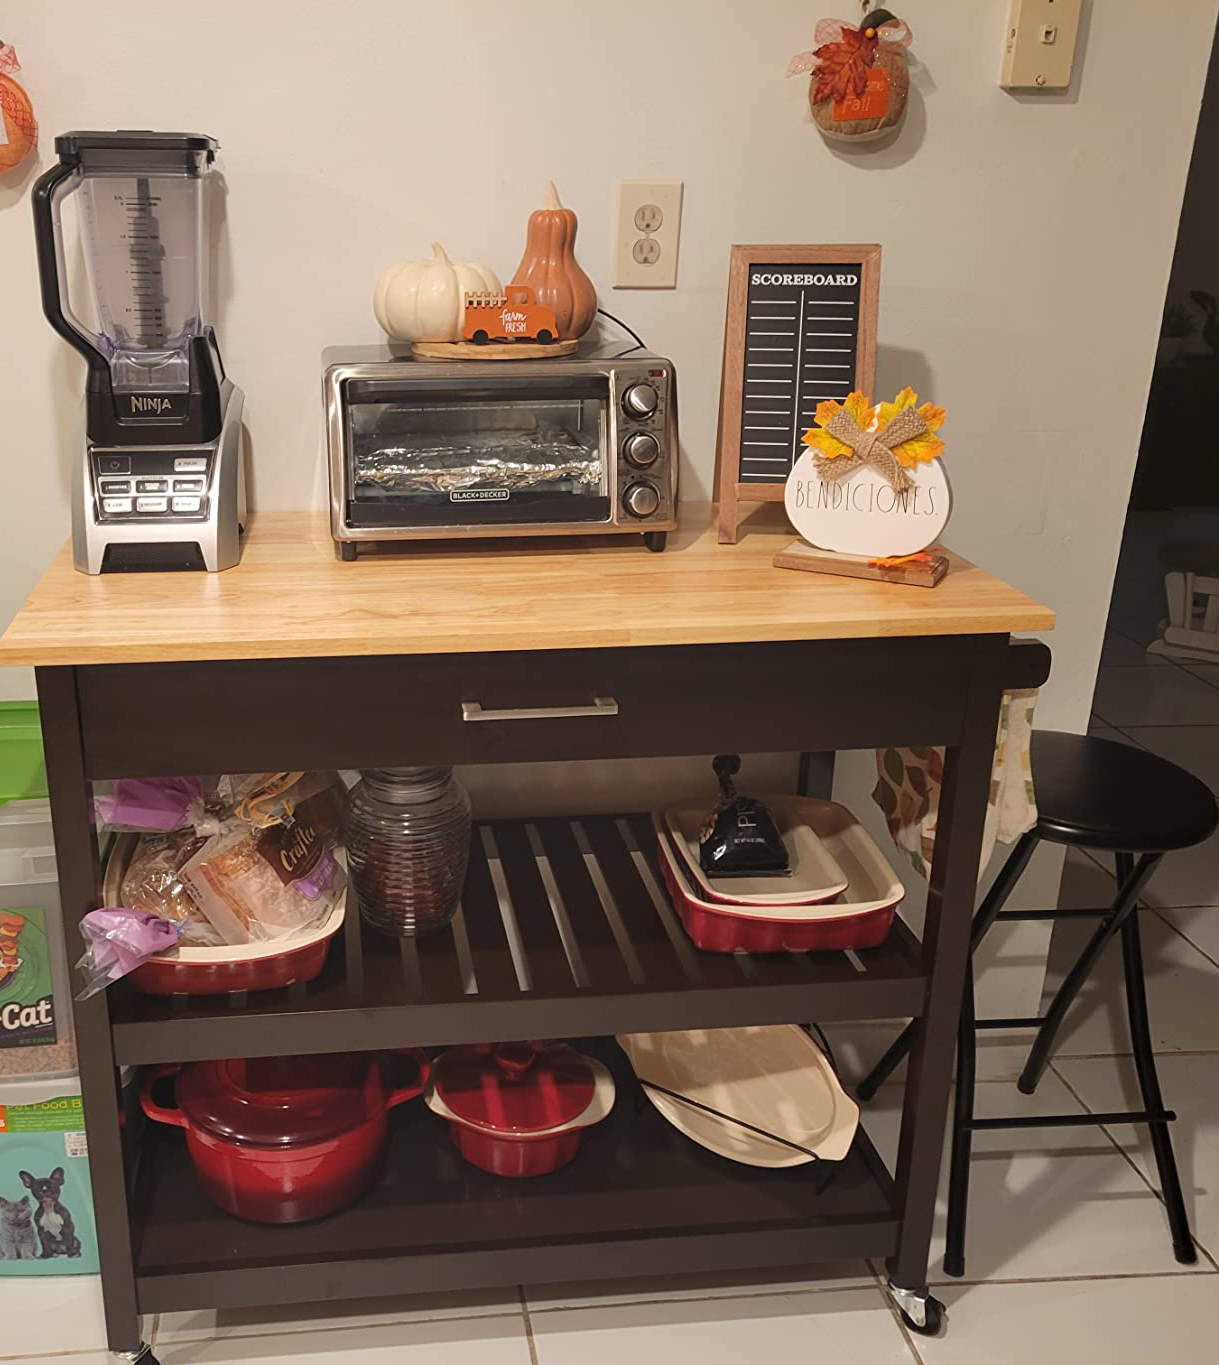 Reviewer image of black and light wood microwave cart in kitchen with pots, food, blender, and toaster oven on shelves